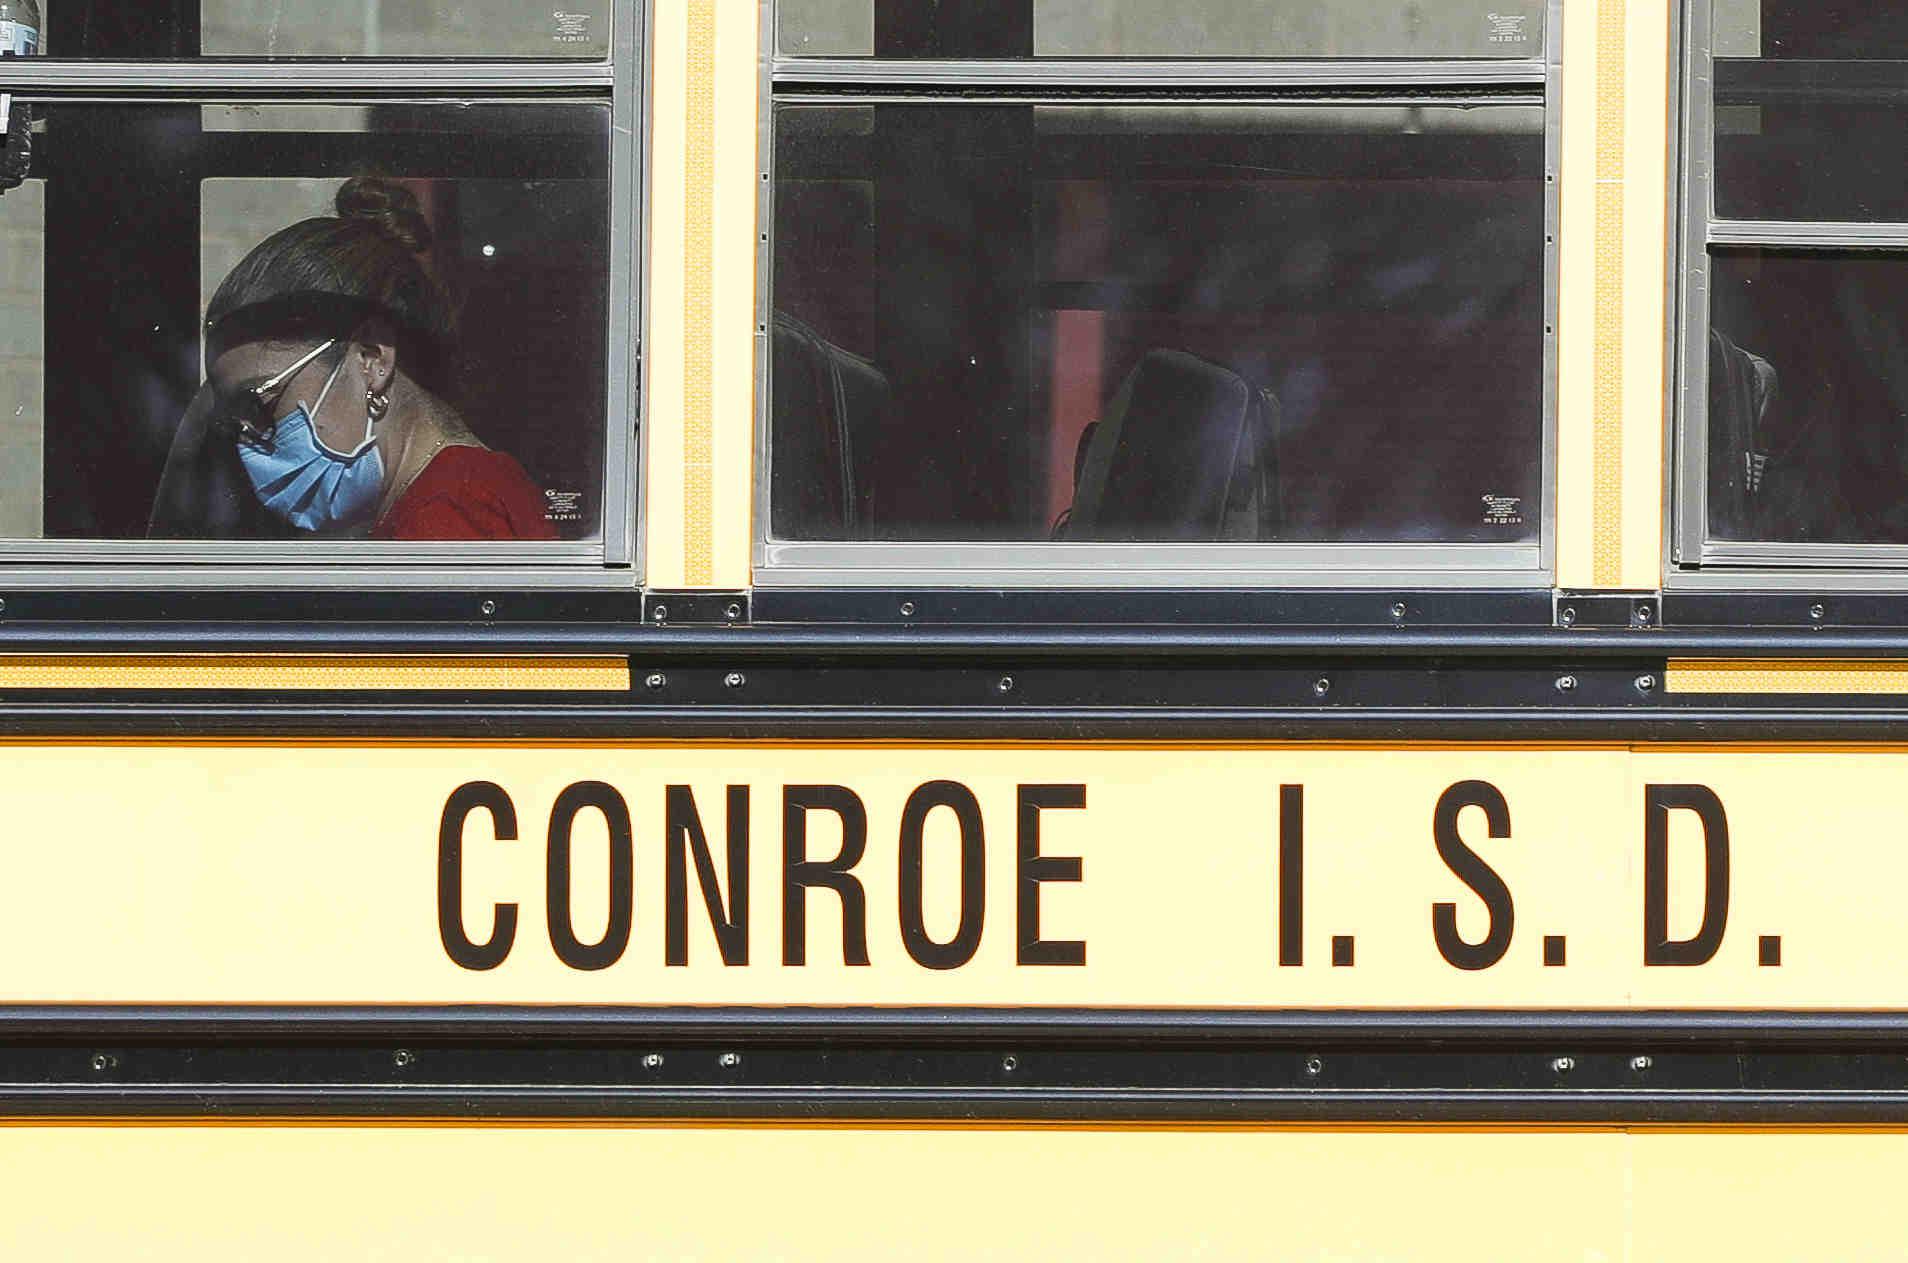 Conroe Isd Approves Its 2022-23 School Calendar With Aug. 10 Start Date